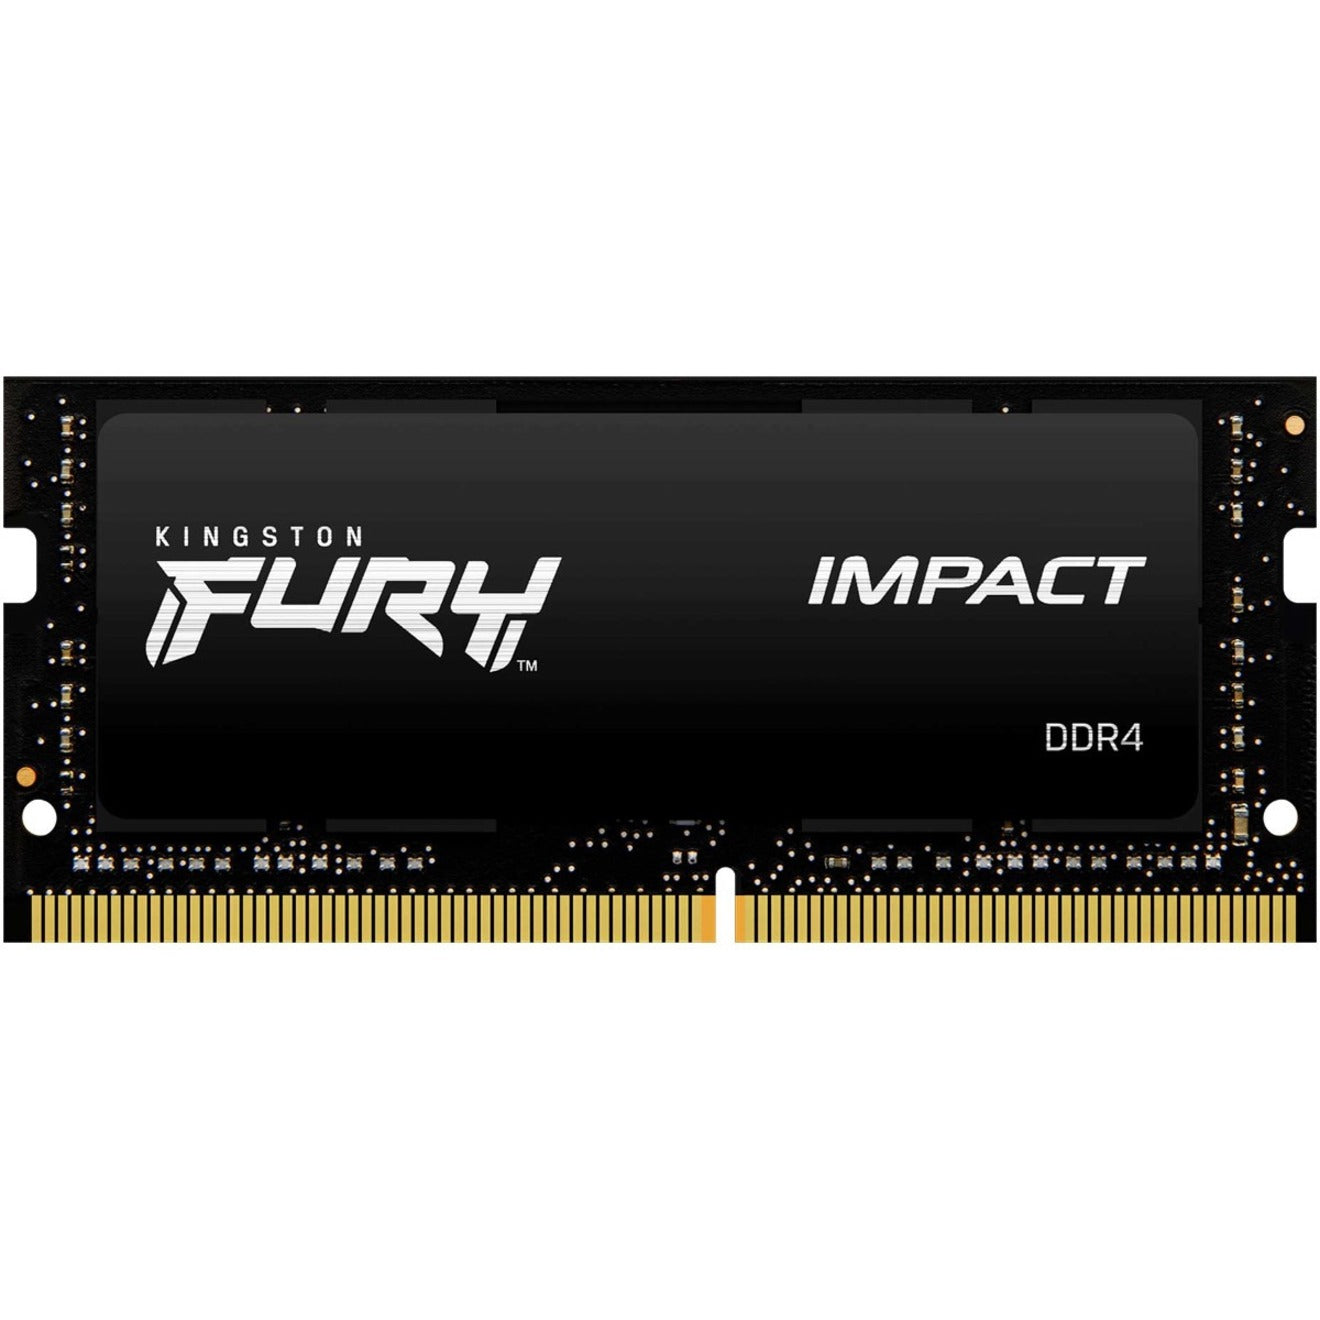 Kingston KF432S20IB/32 FURY Impact 32GB DDR4 SDRAM Memory Module, High-Speed Performance for Mini PCs, Notebooks, and Motherboards